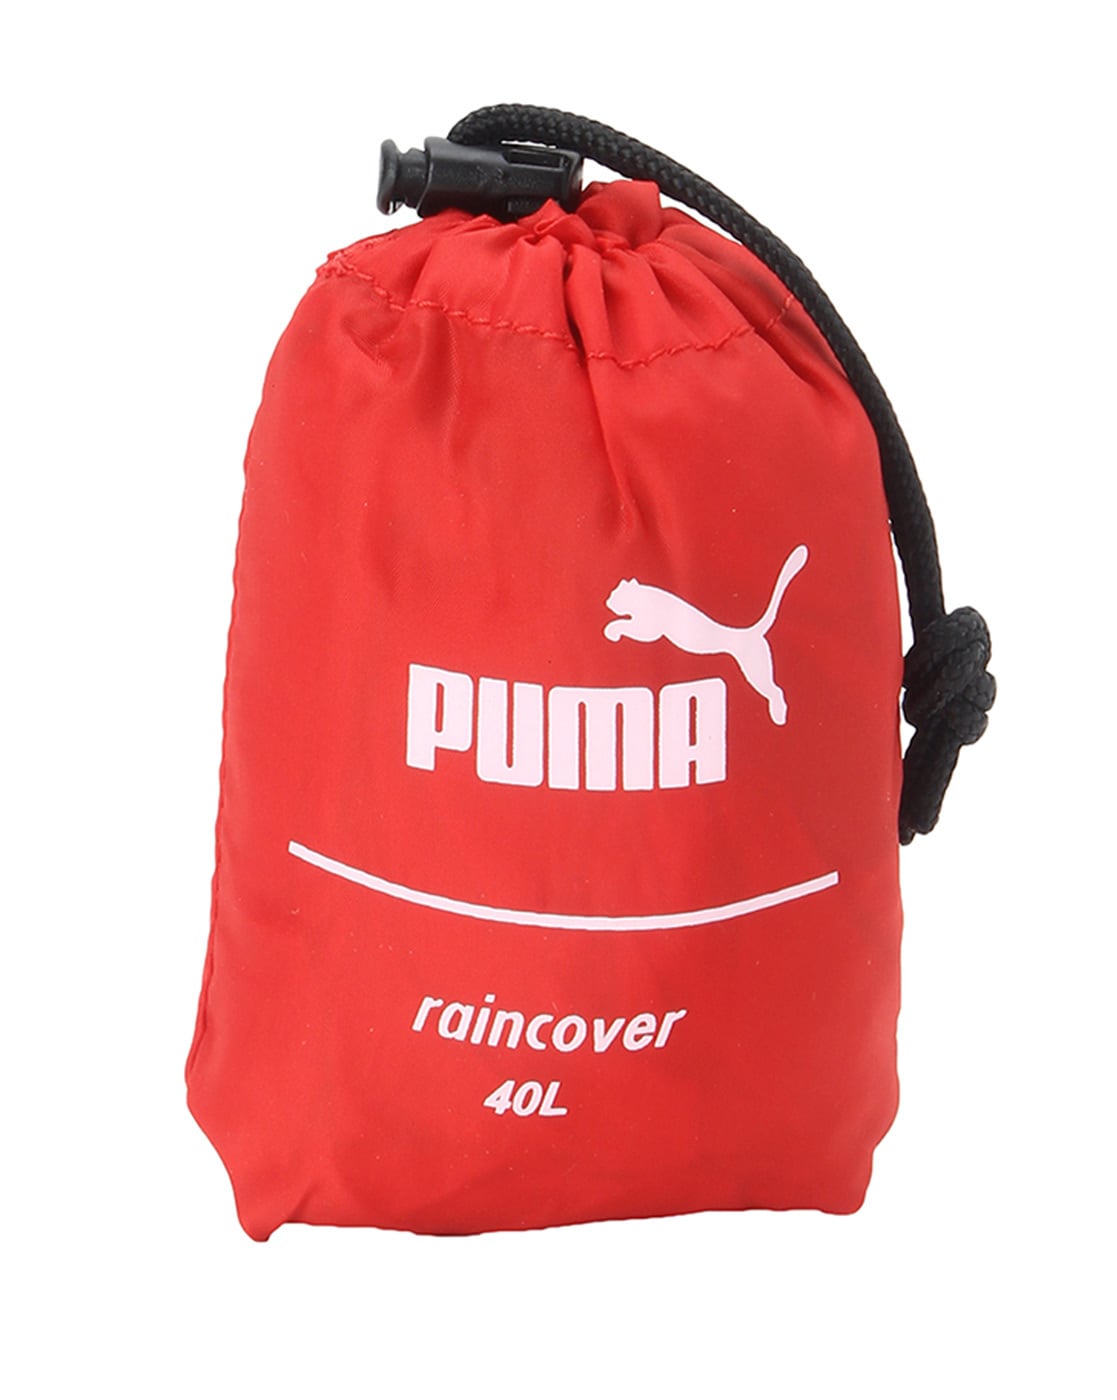 Puma Prime Time Bucket Bag 07740301 in Karnal at best price by Puma Store   Justdial